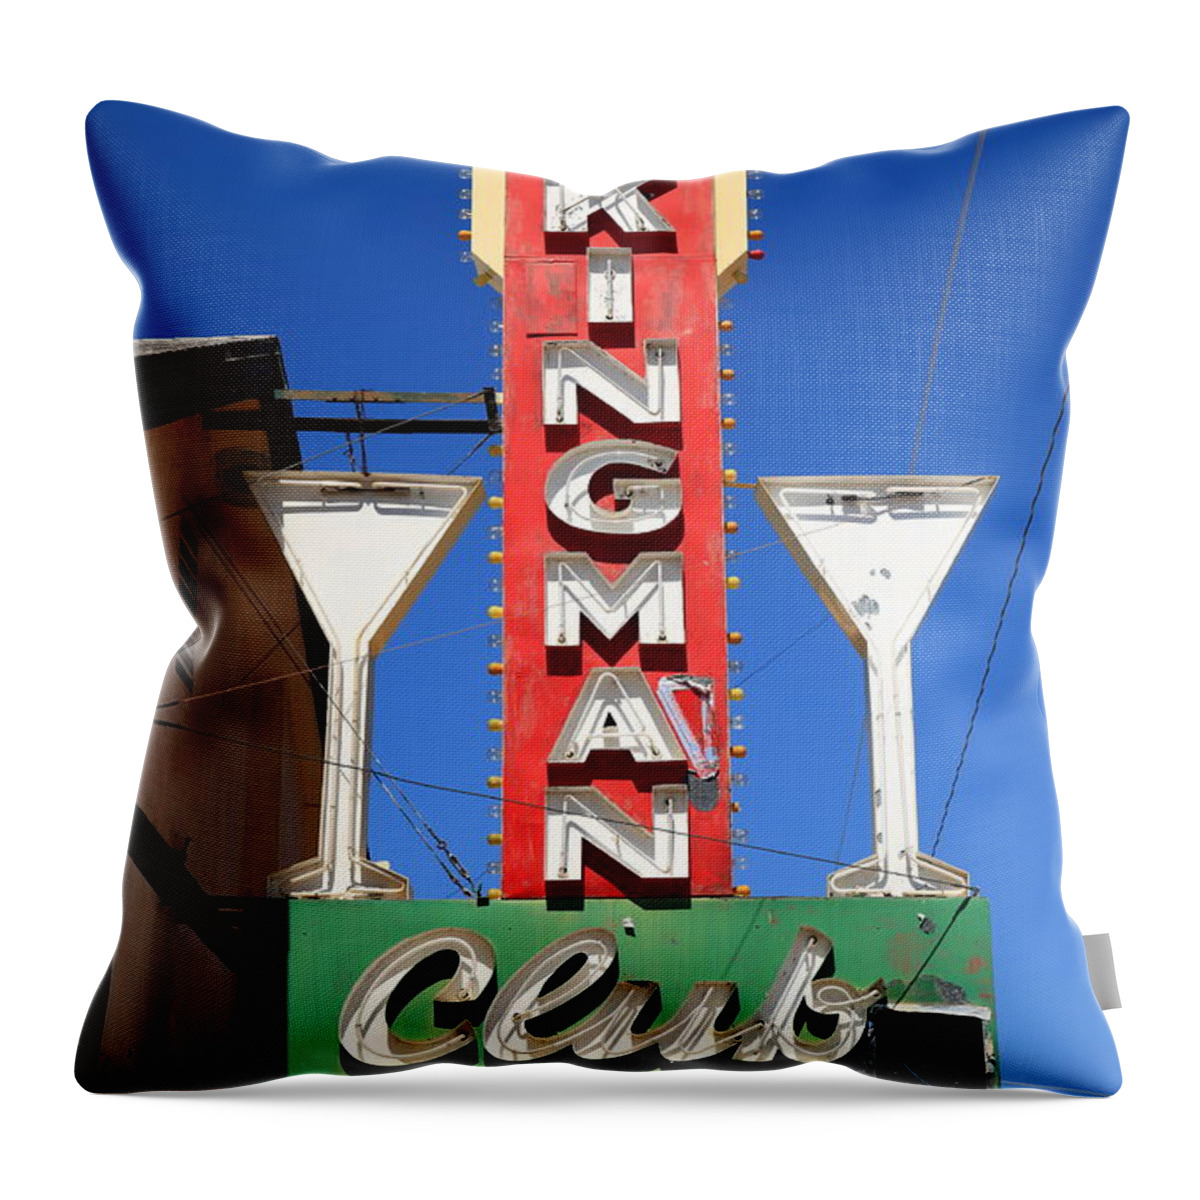 66 Throw Pillow featuring the photograph Route 66 - Kingman Club Neon 2012 by Frank Romeo